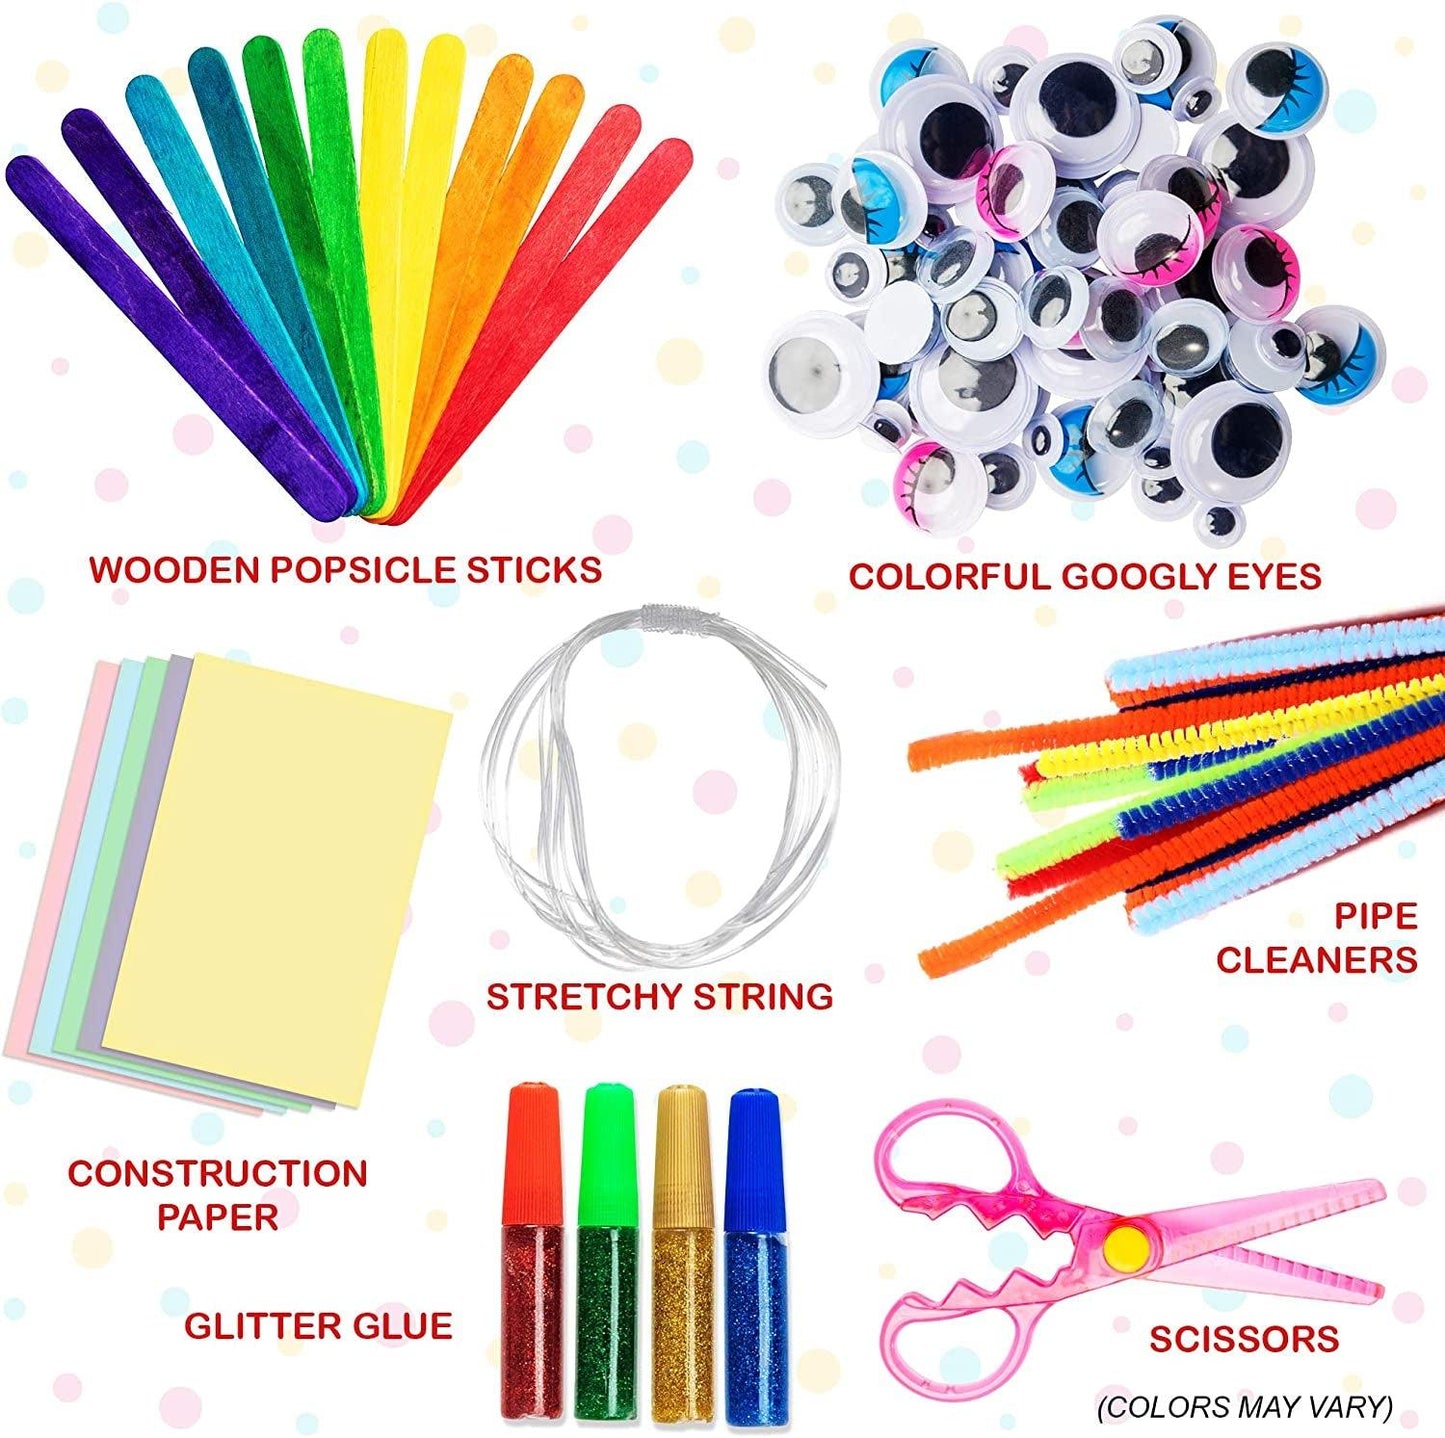 Kids Crafts and Art Supplies Jar Kit 1000+ Piece Set Glitter Glue, Paper, Colored Popsicle Sticks, Googly Eyes, Pipe Cleaners - WoodArtSupply